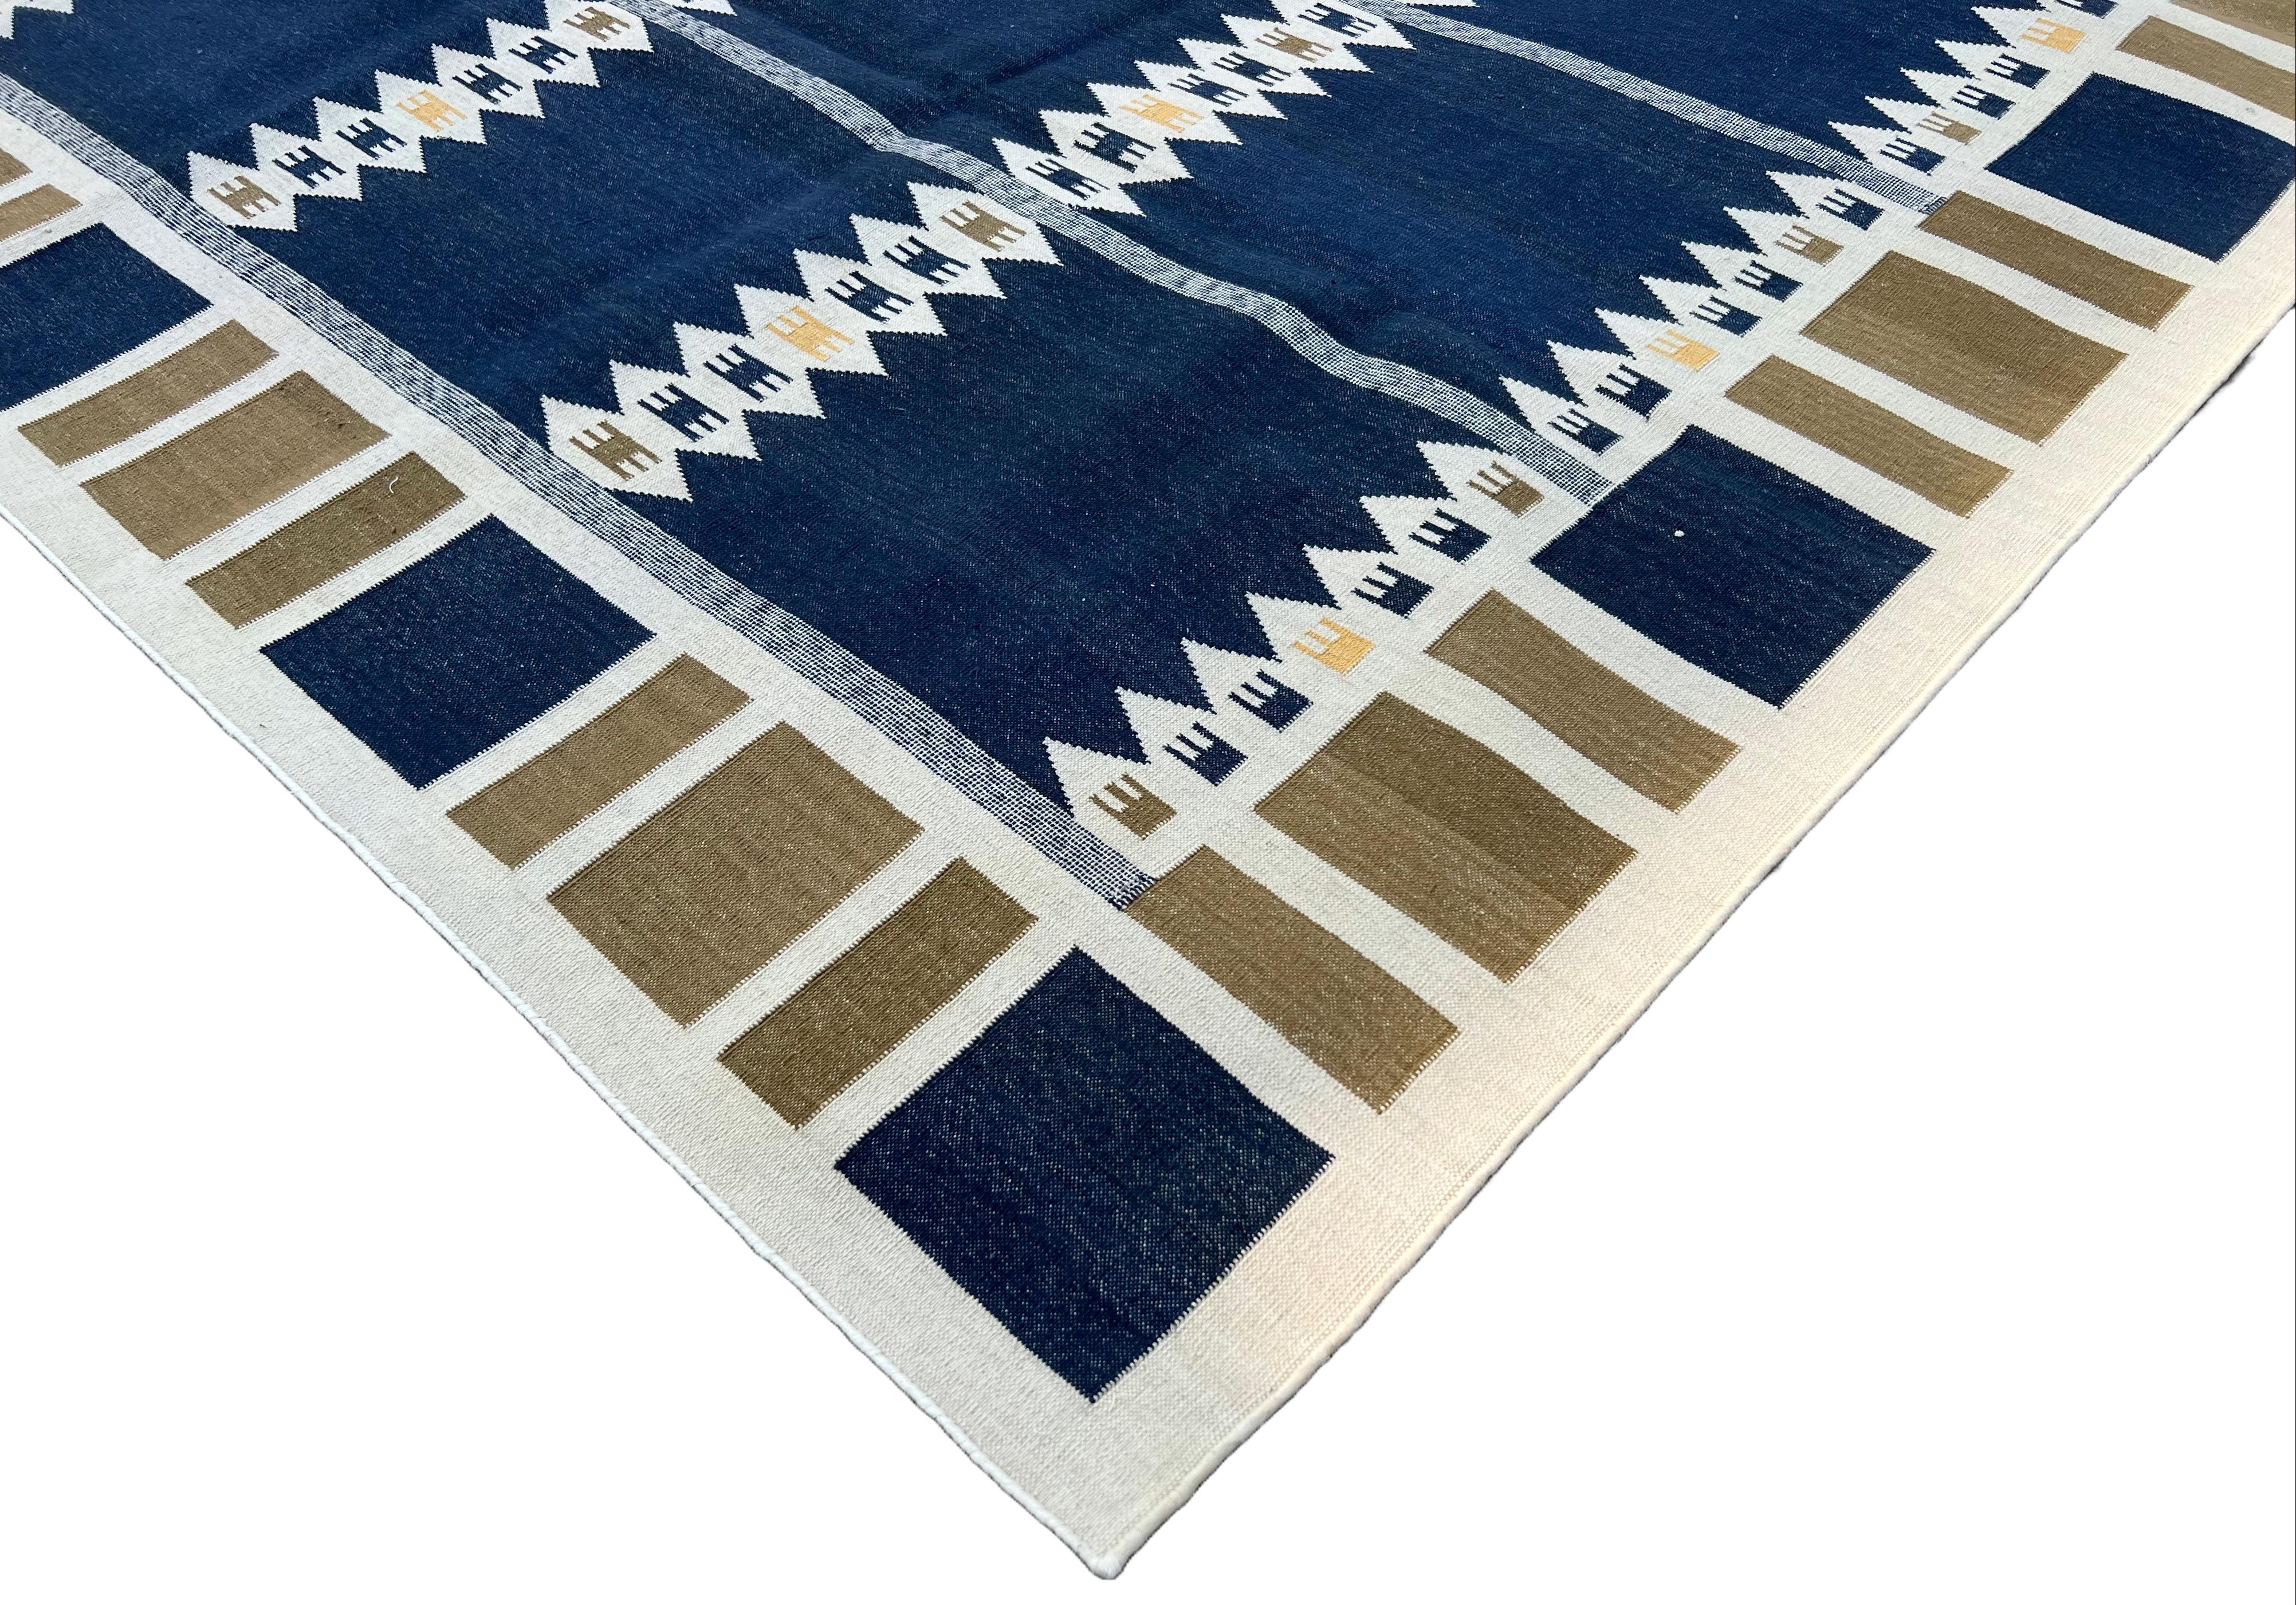 Mid-Century Modern Handmade Cotton Area Flat Weave Rug, 8x10 Blue And Brown Geometric Indian Rug For Sale